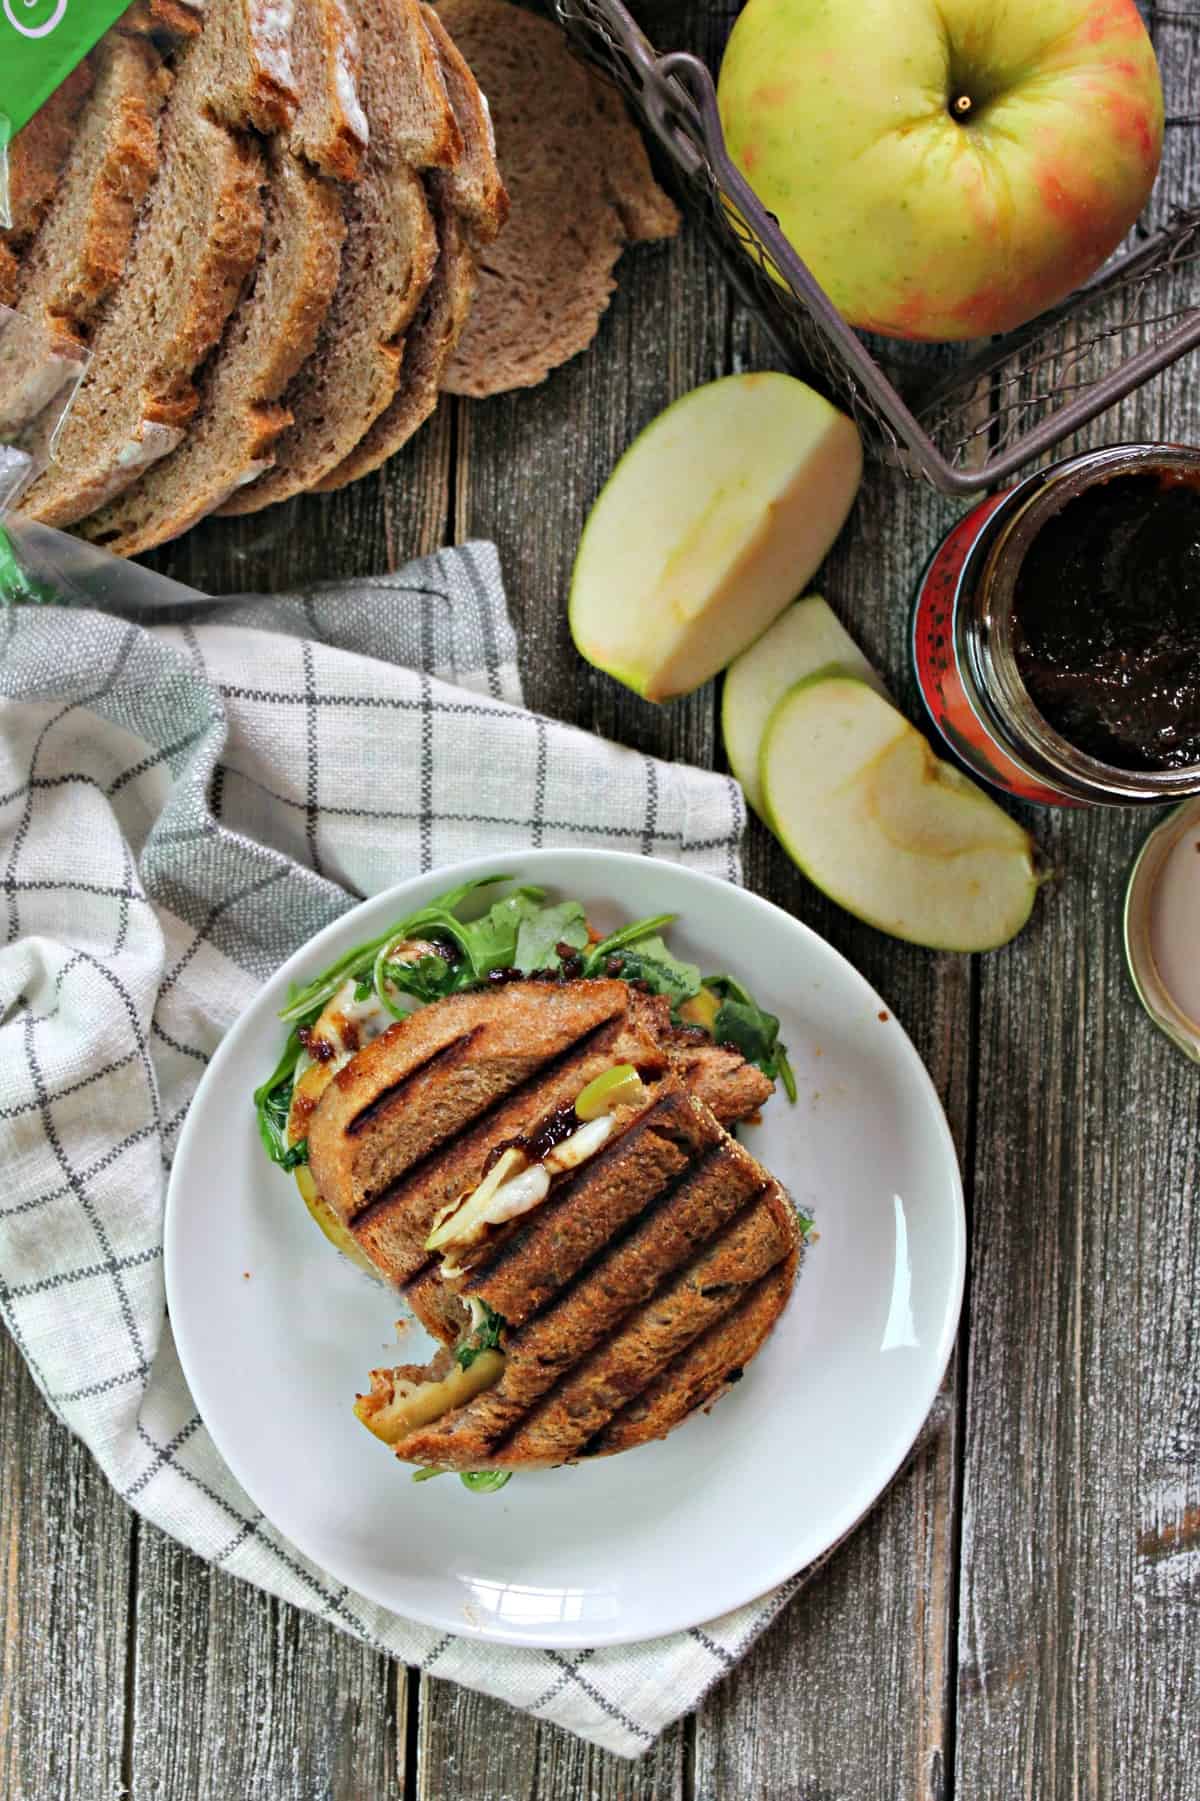 Manchego, Fig & Apple Panini! Even quick and easy lunches can be seasonal and flavorful; the proof is in this panini! Crusty bread is slathered with fig preserves, then topped with manchego cheese & tart apple slices and grilled to melty perfection!